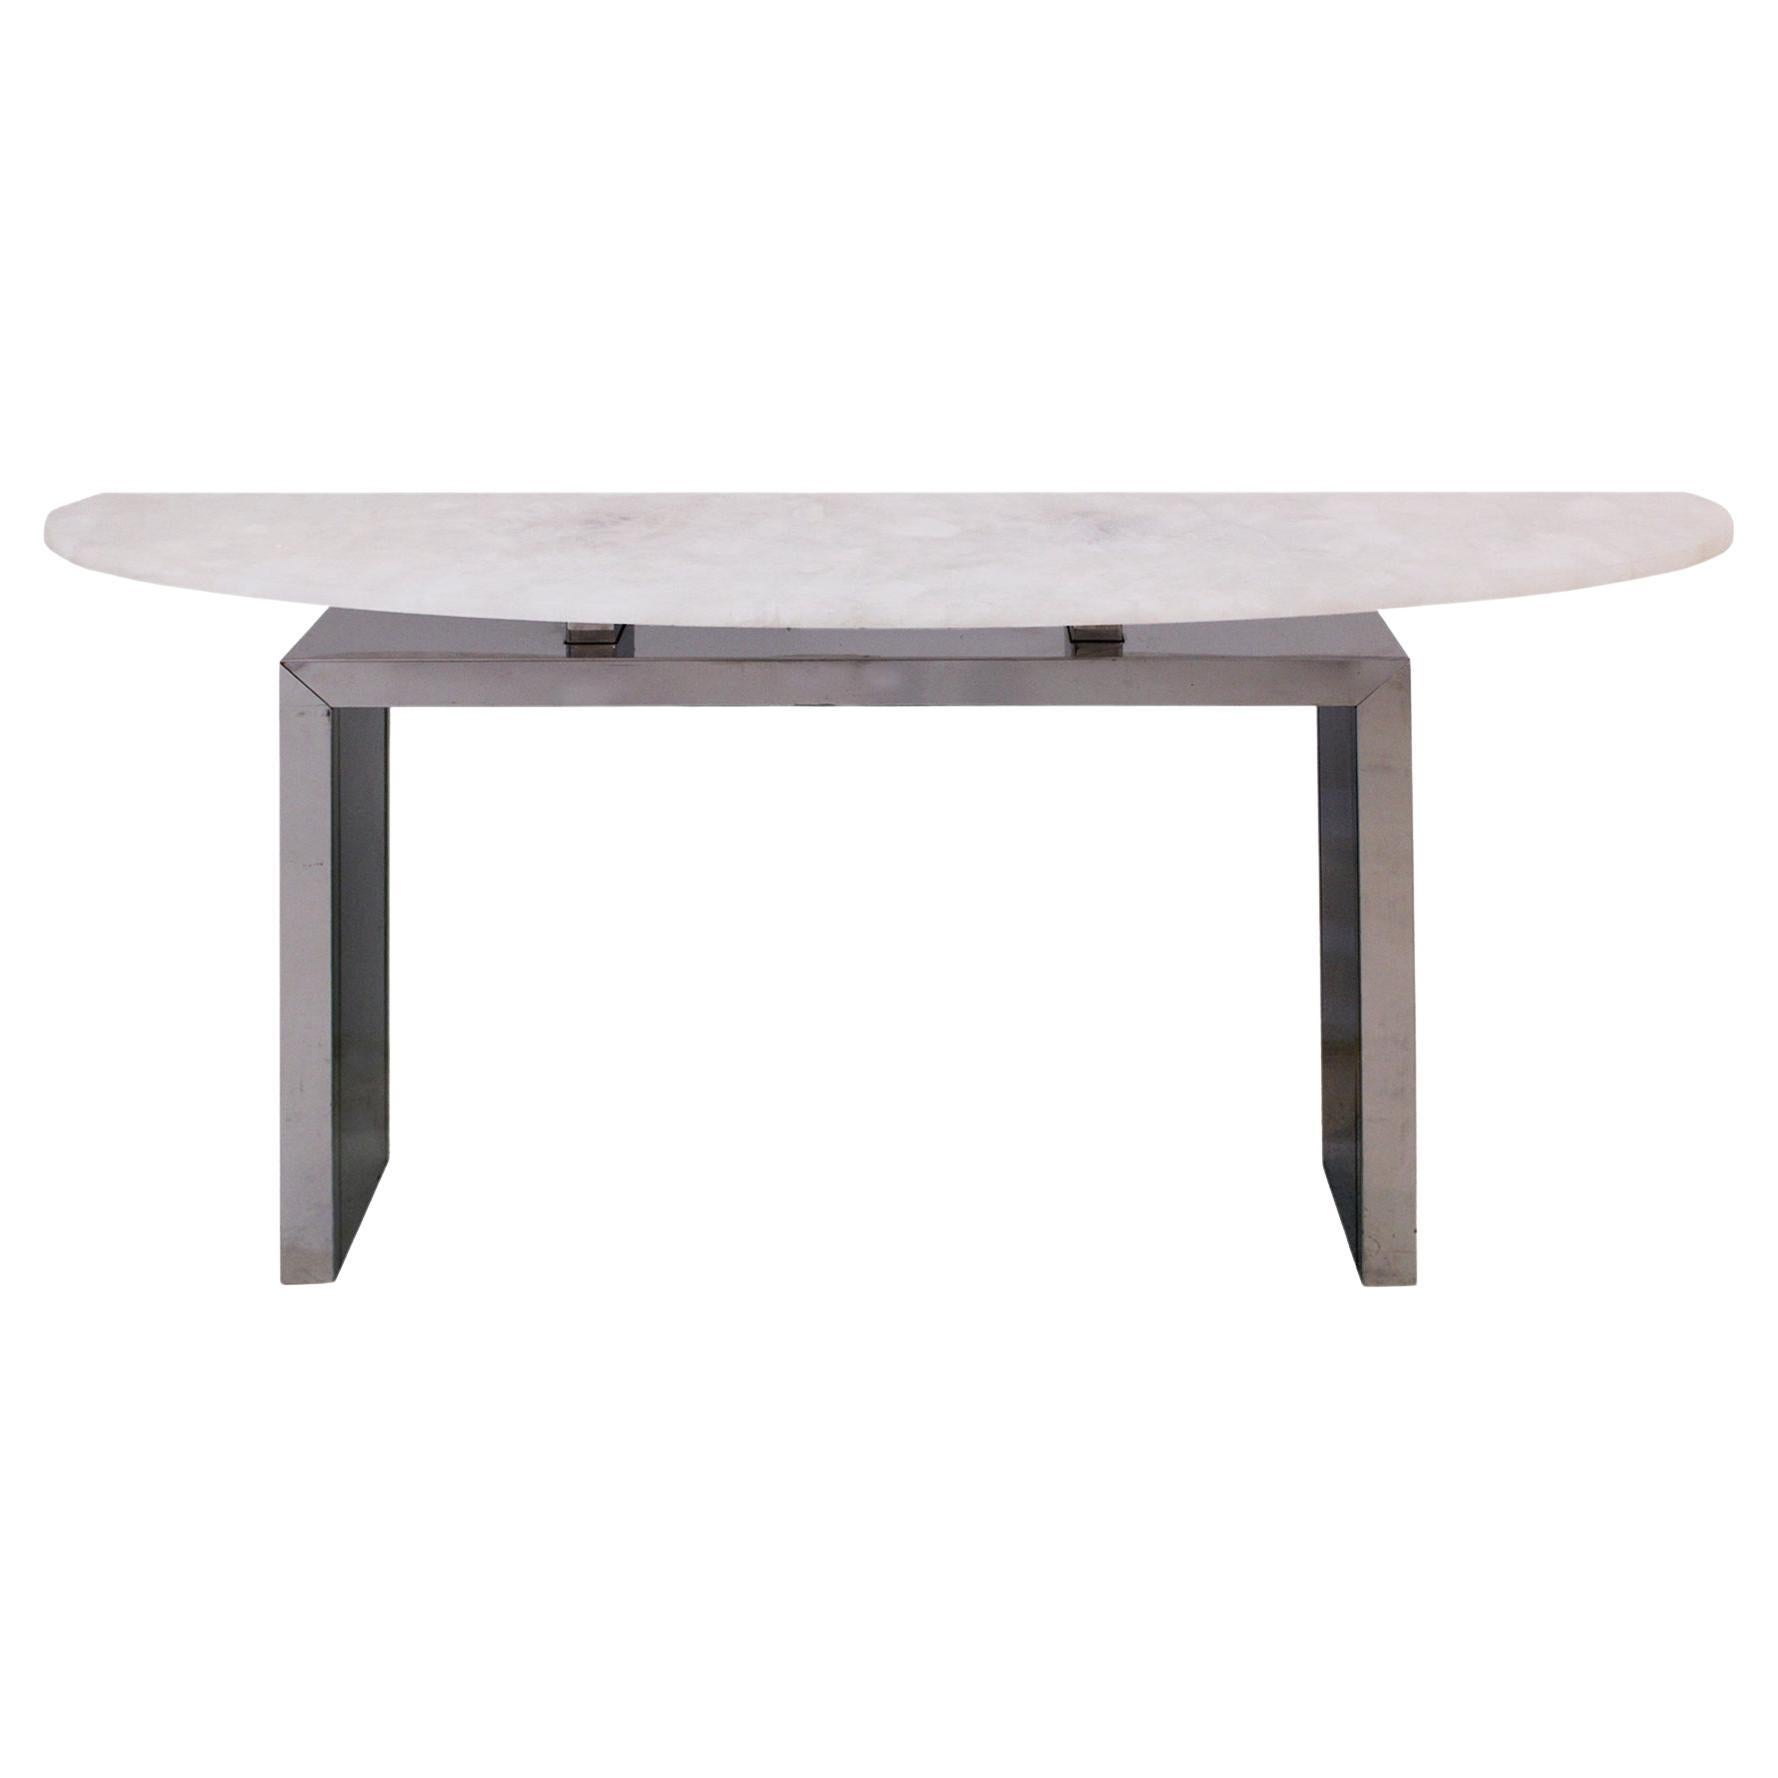 Contemporary Italian Demilune Console Table Made of White Quartz and Steel base For Sale